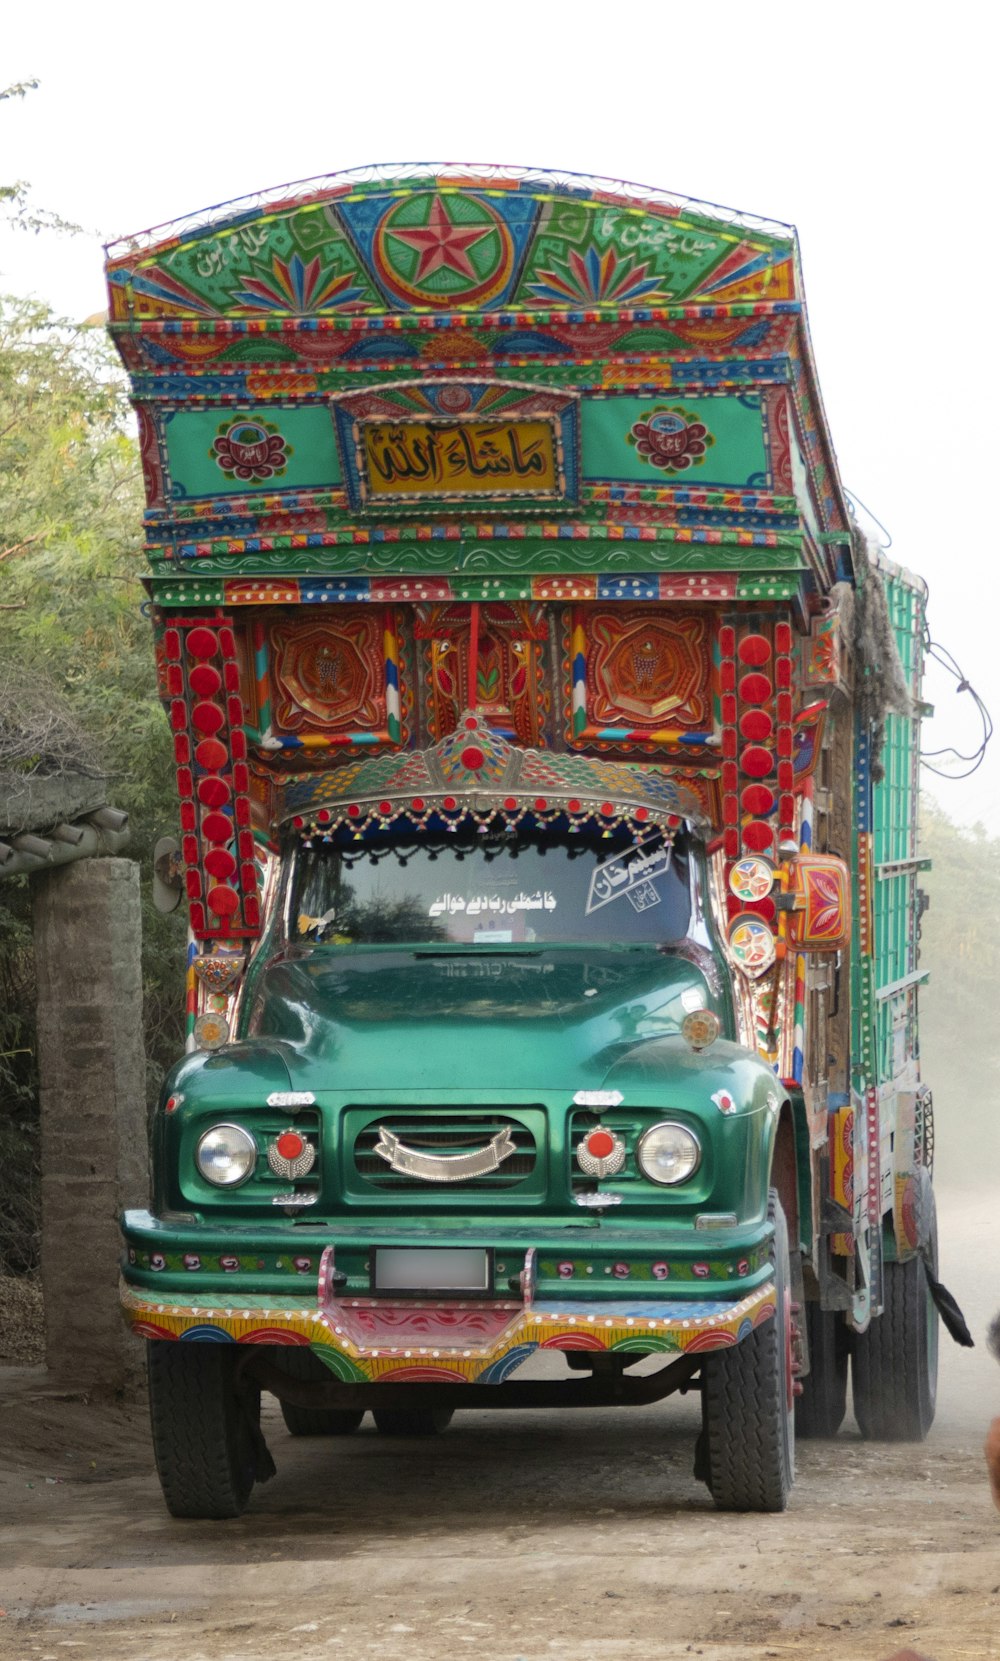 a green truck with a colorful display